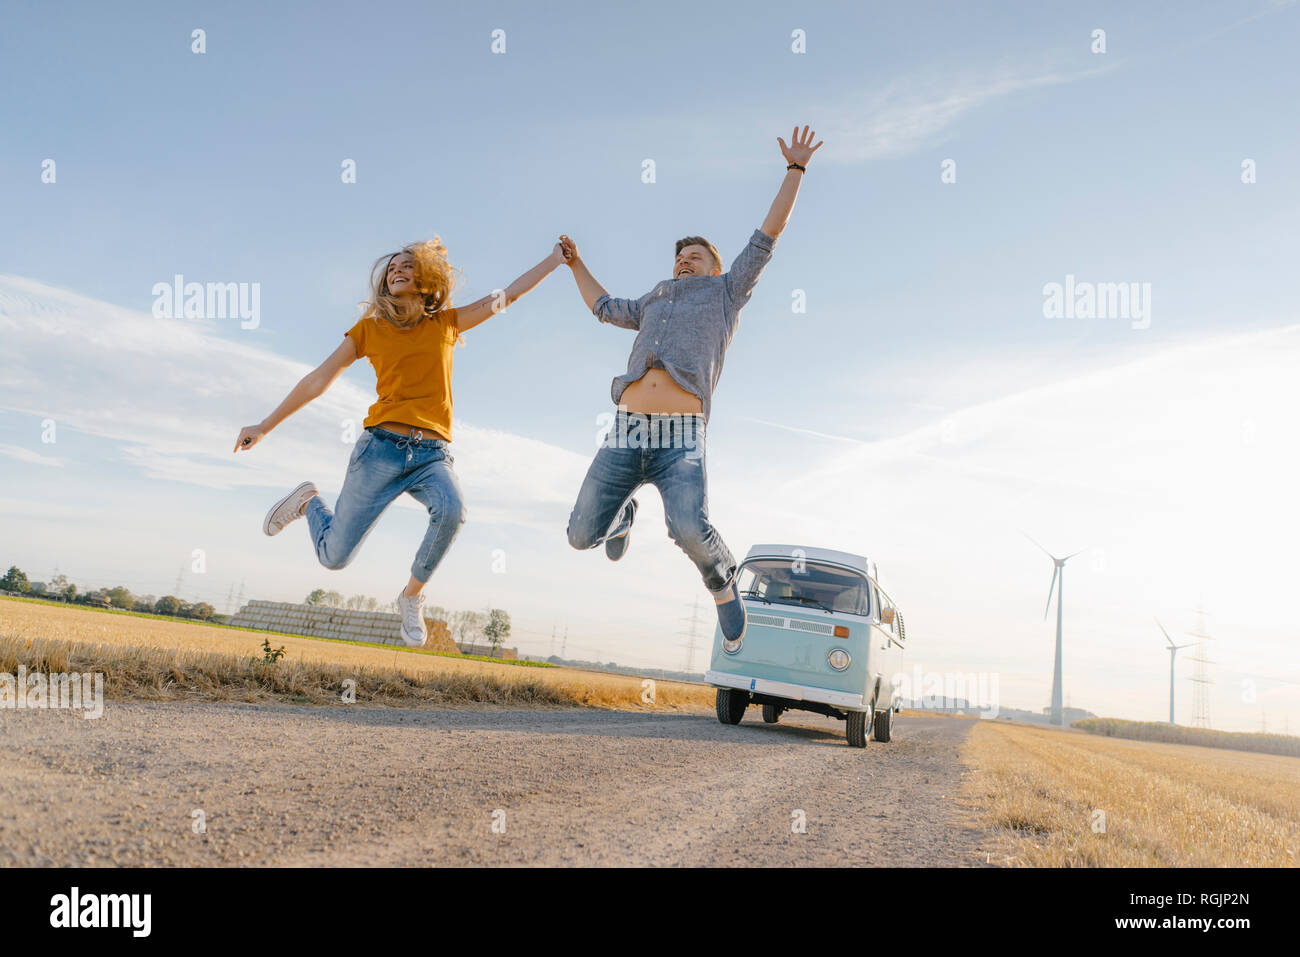 Exuberant couple jumping on dirt track at camper van in rural landscape Stock Photo